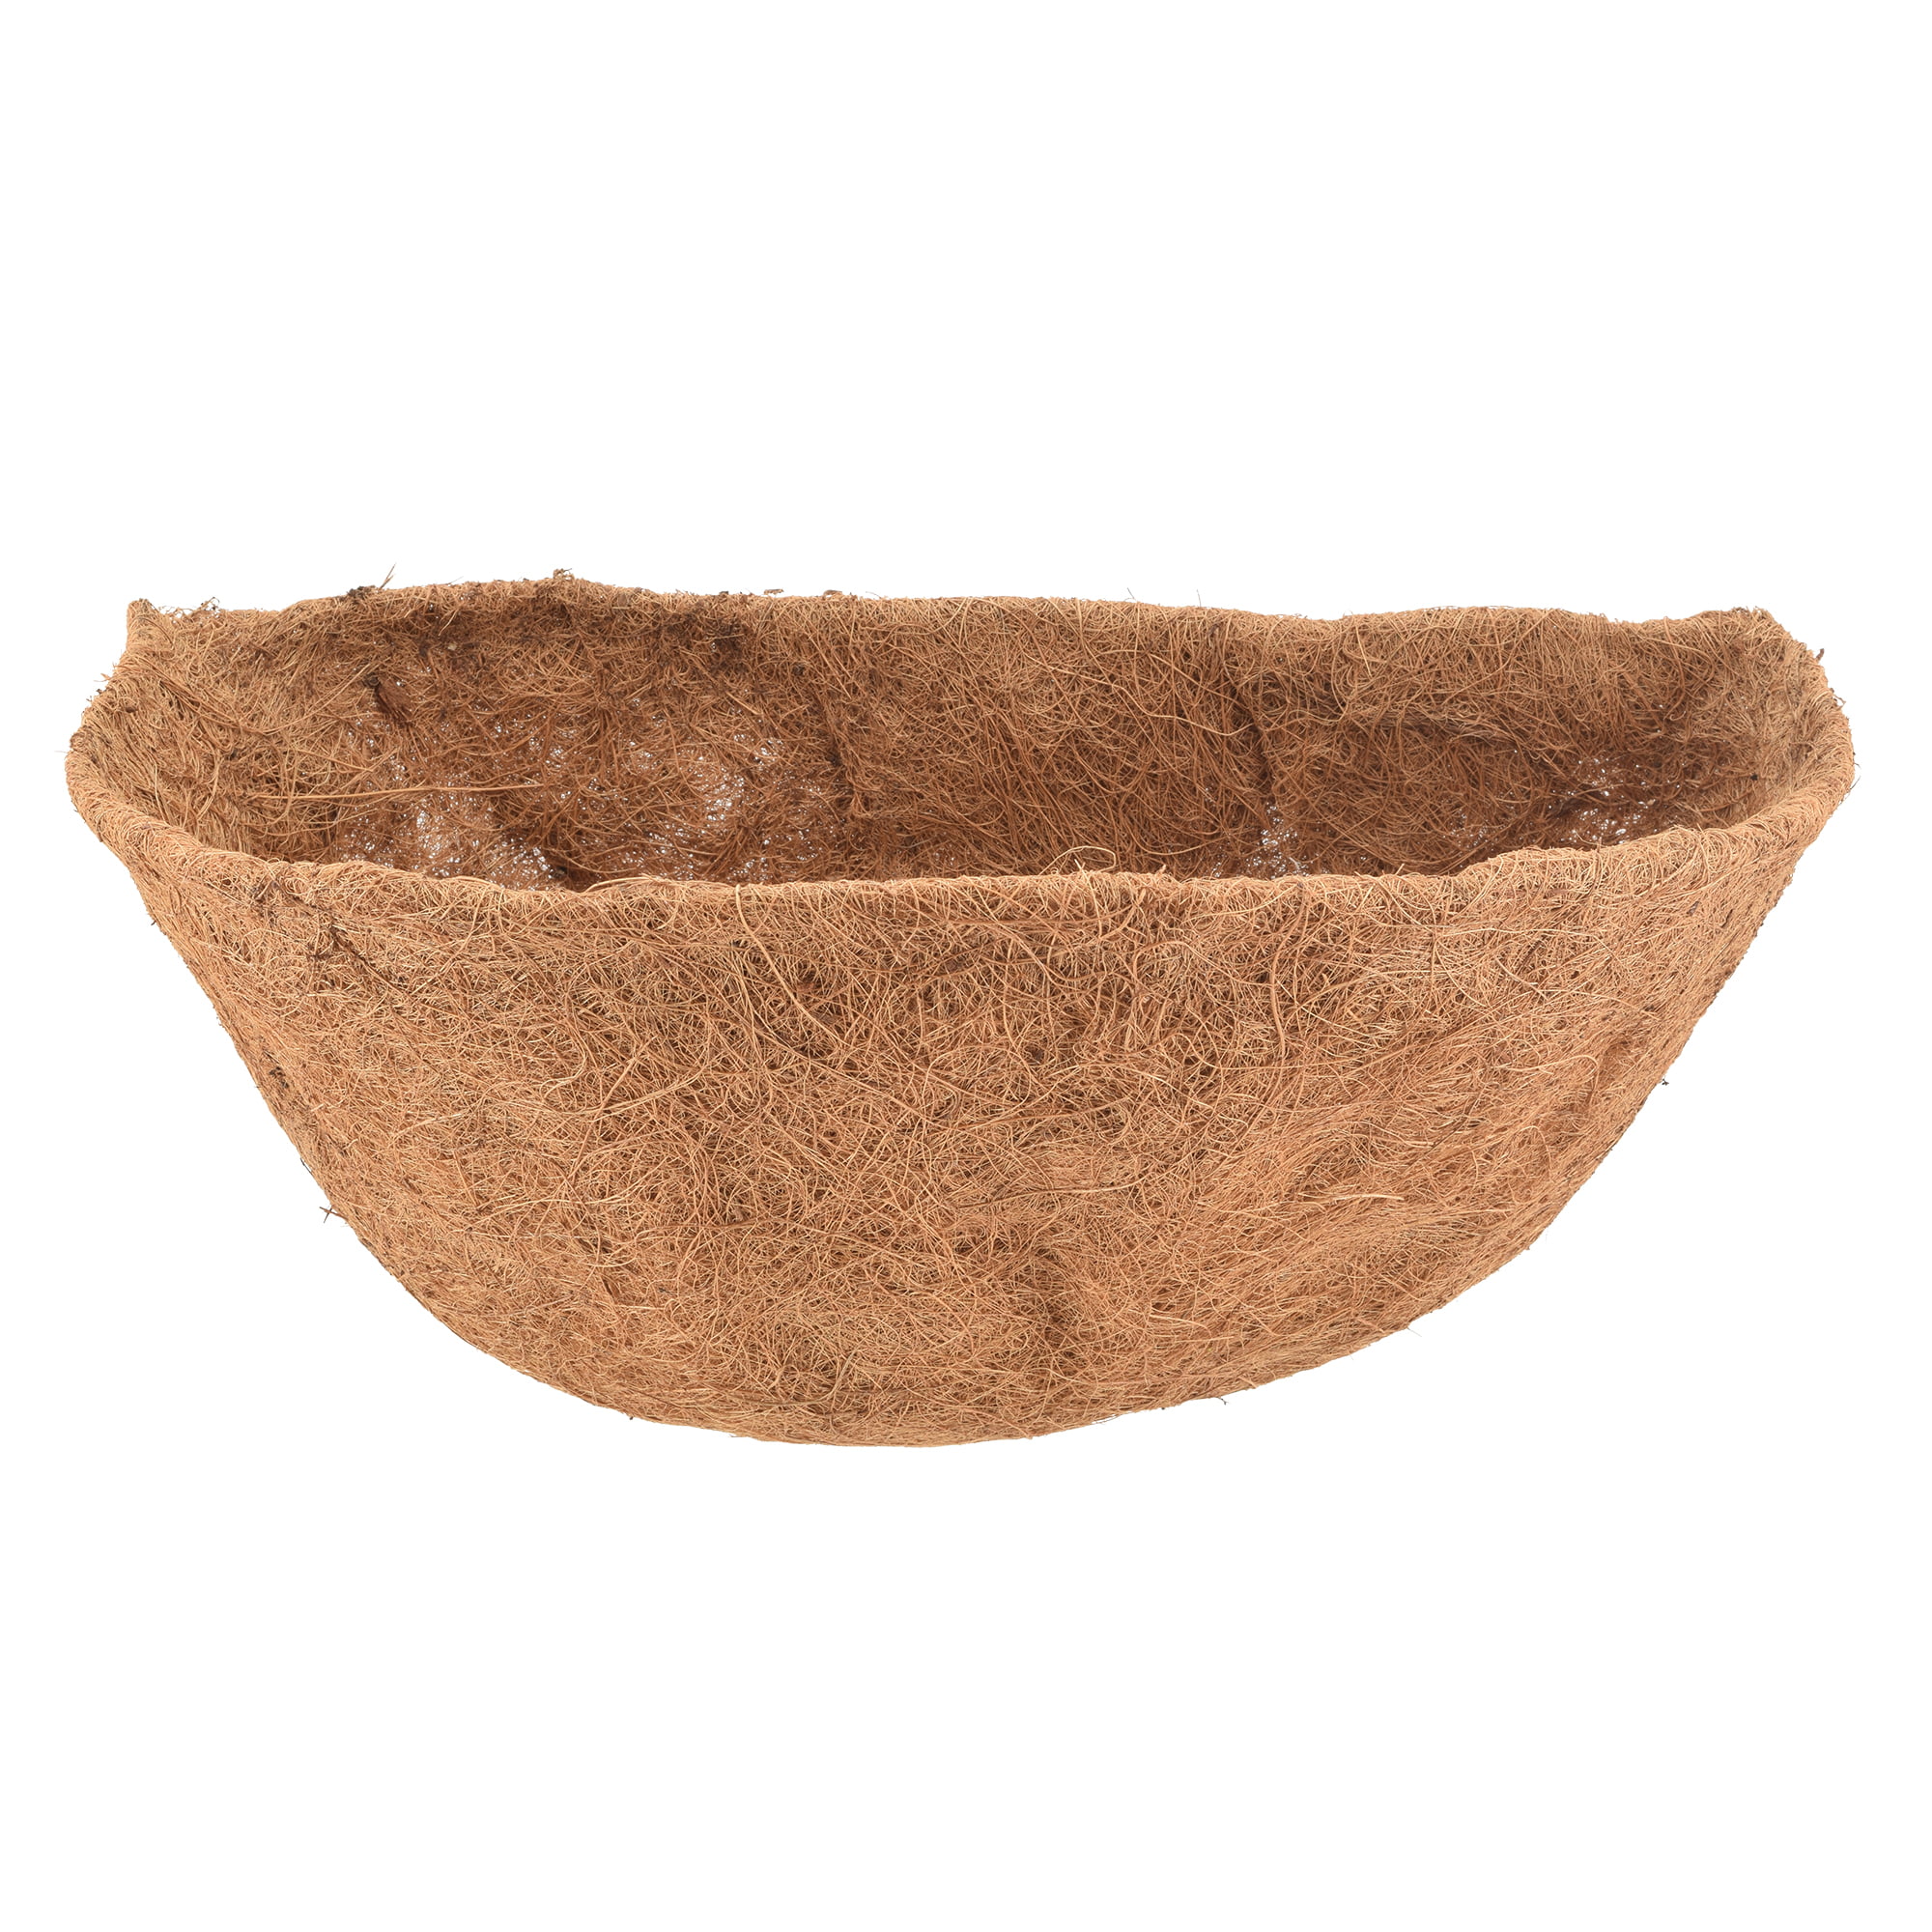 Replacement Coco Fiber Basket Liner for 18-inch Baskets SB-F45L